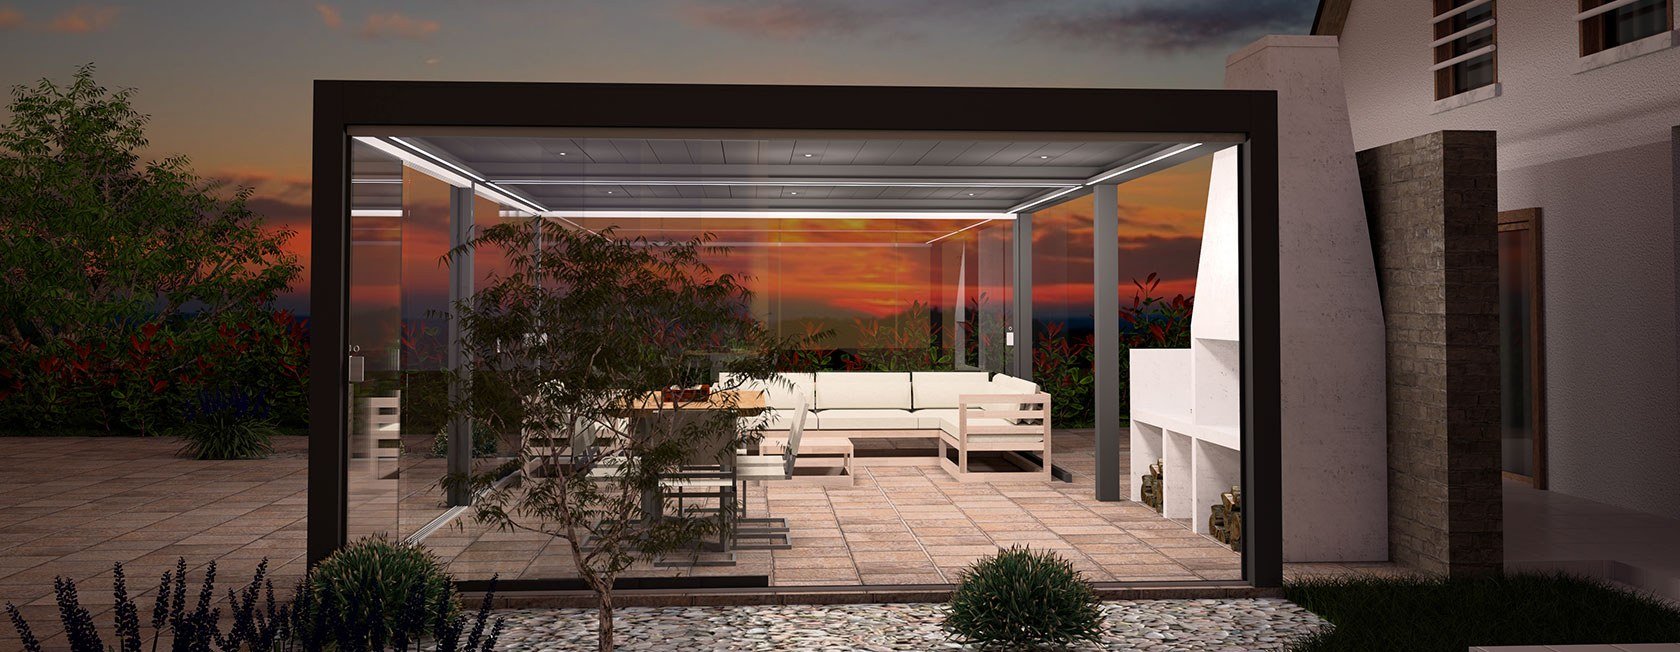 Glass Rooms - Outdoor Living